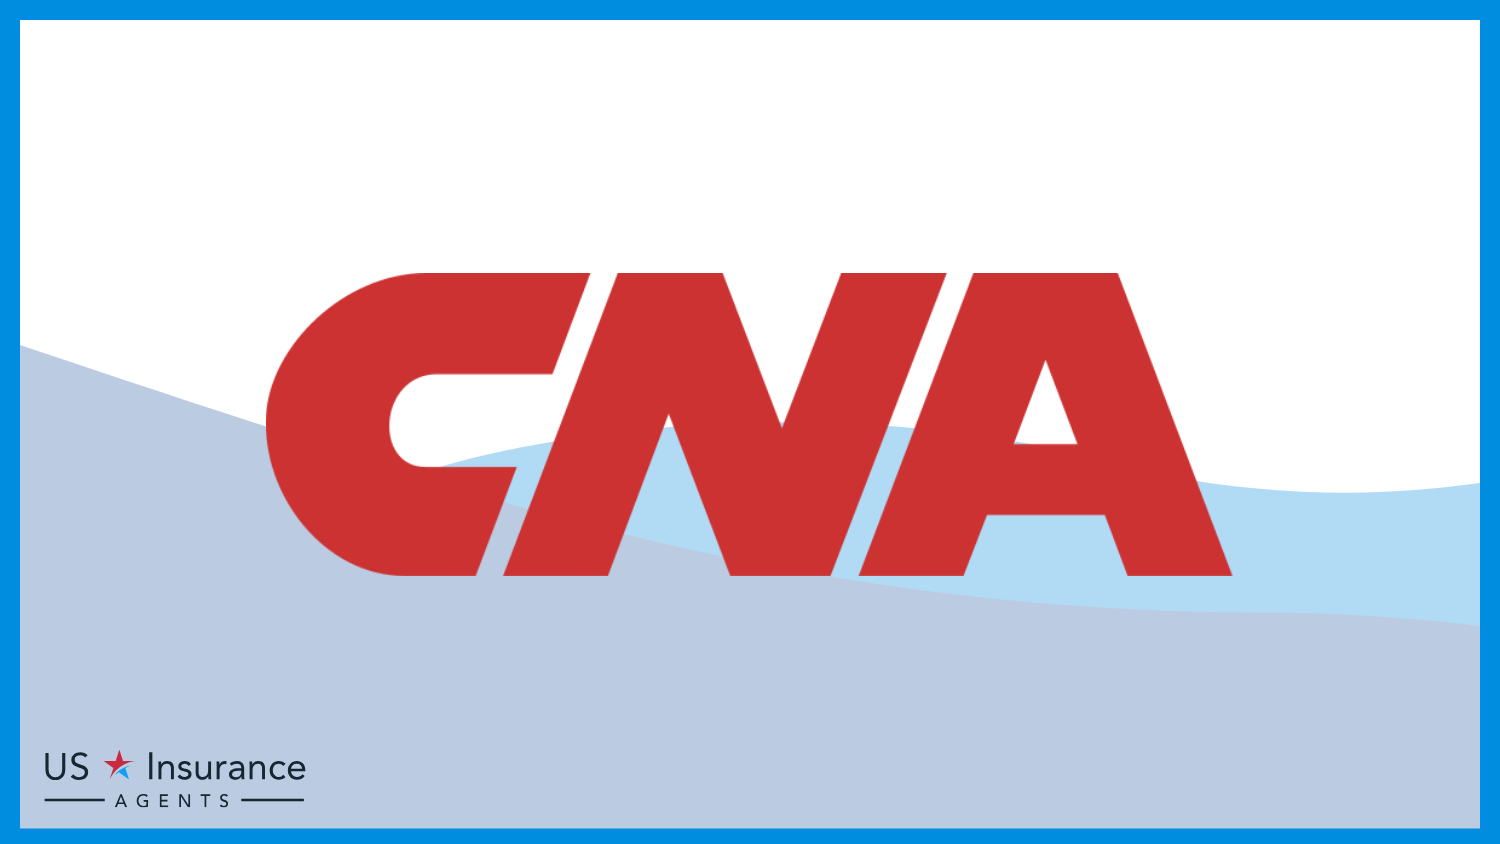 CNA: Best Business Insurance for Event Planners